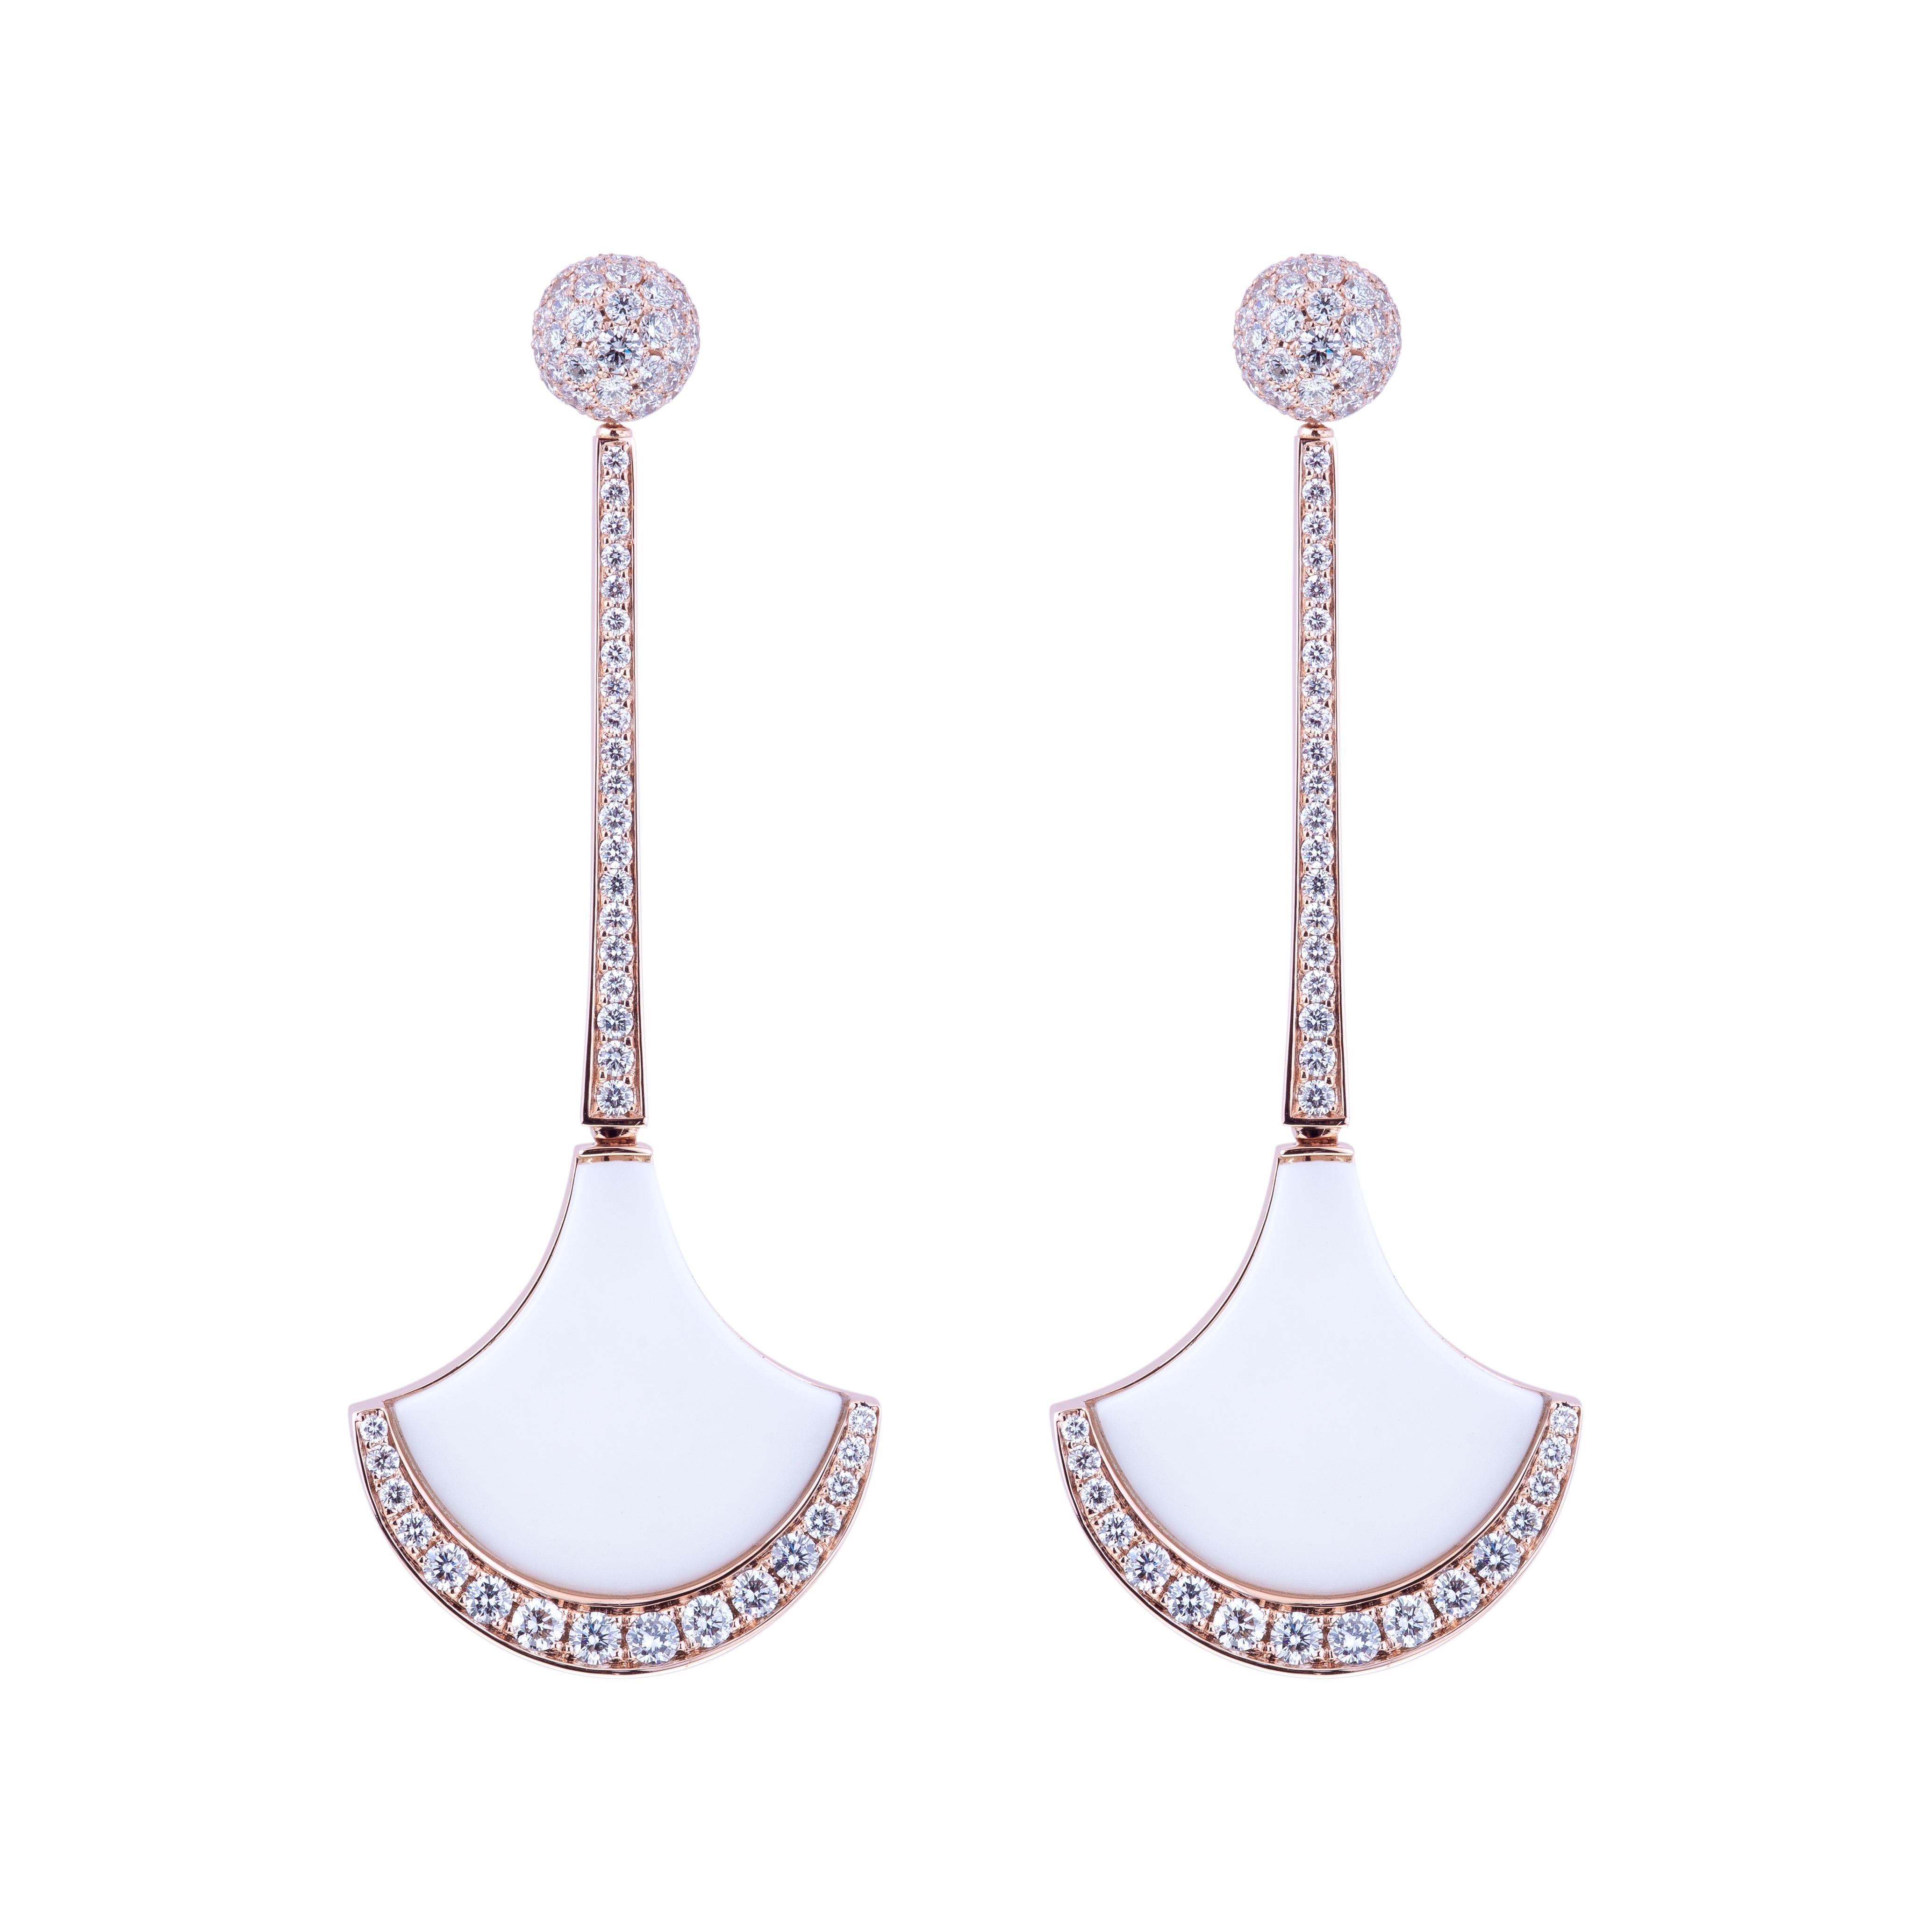 Exclusive Wave Collection by Angeletti Rose Gold Diamonds and White Ceramic.
The Use of Ceramic is one of the Characteristic of the Endless Creative Streak of Angeletti, giving  to these earrings a Definitive Contemporary Look. Manifactured in Rome.